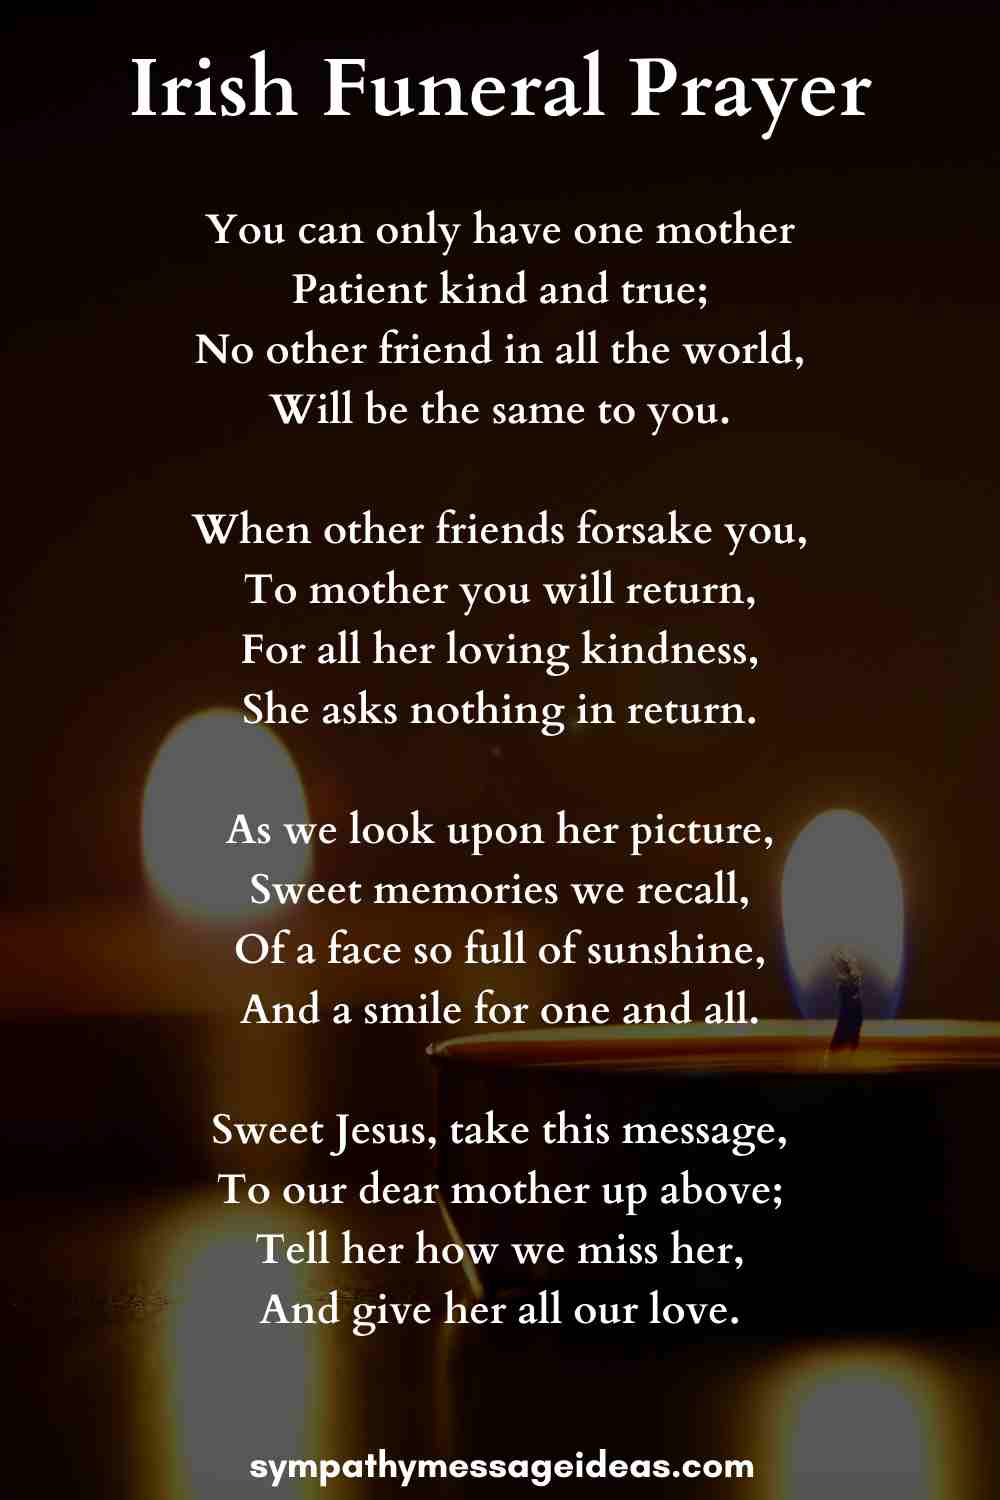 Irish funeral prayer for a mother